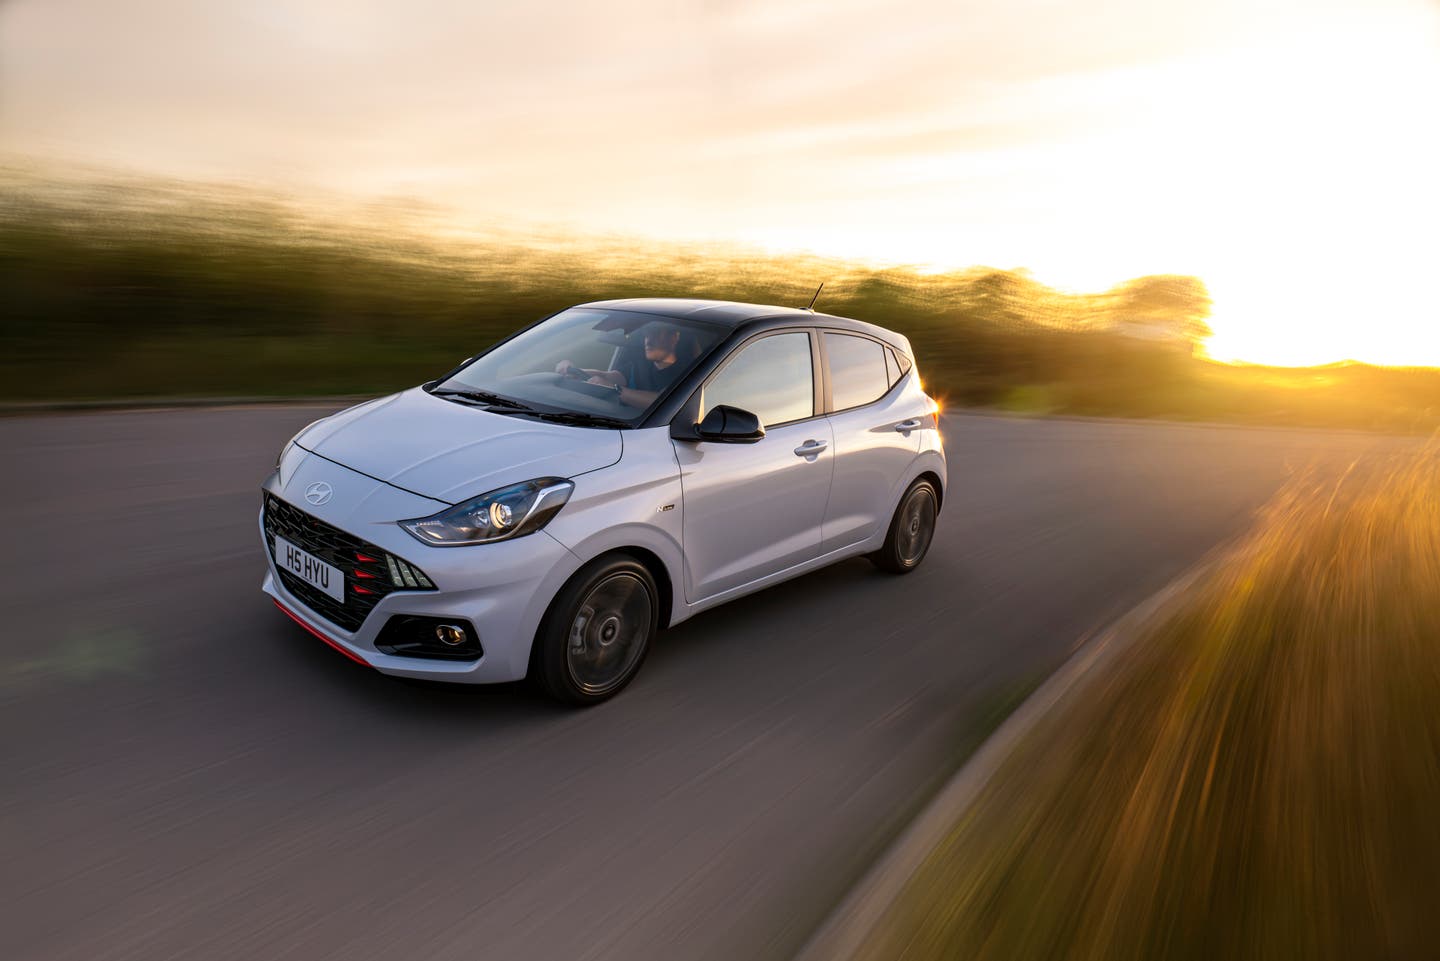 Hyundai i10 driving away from a sunset